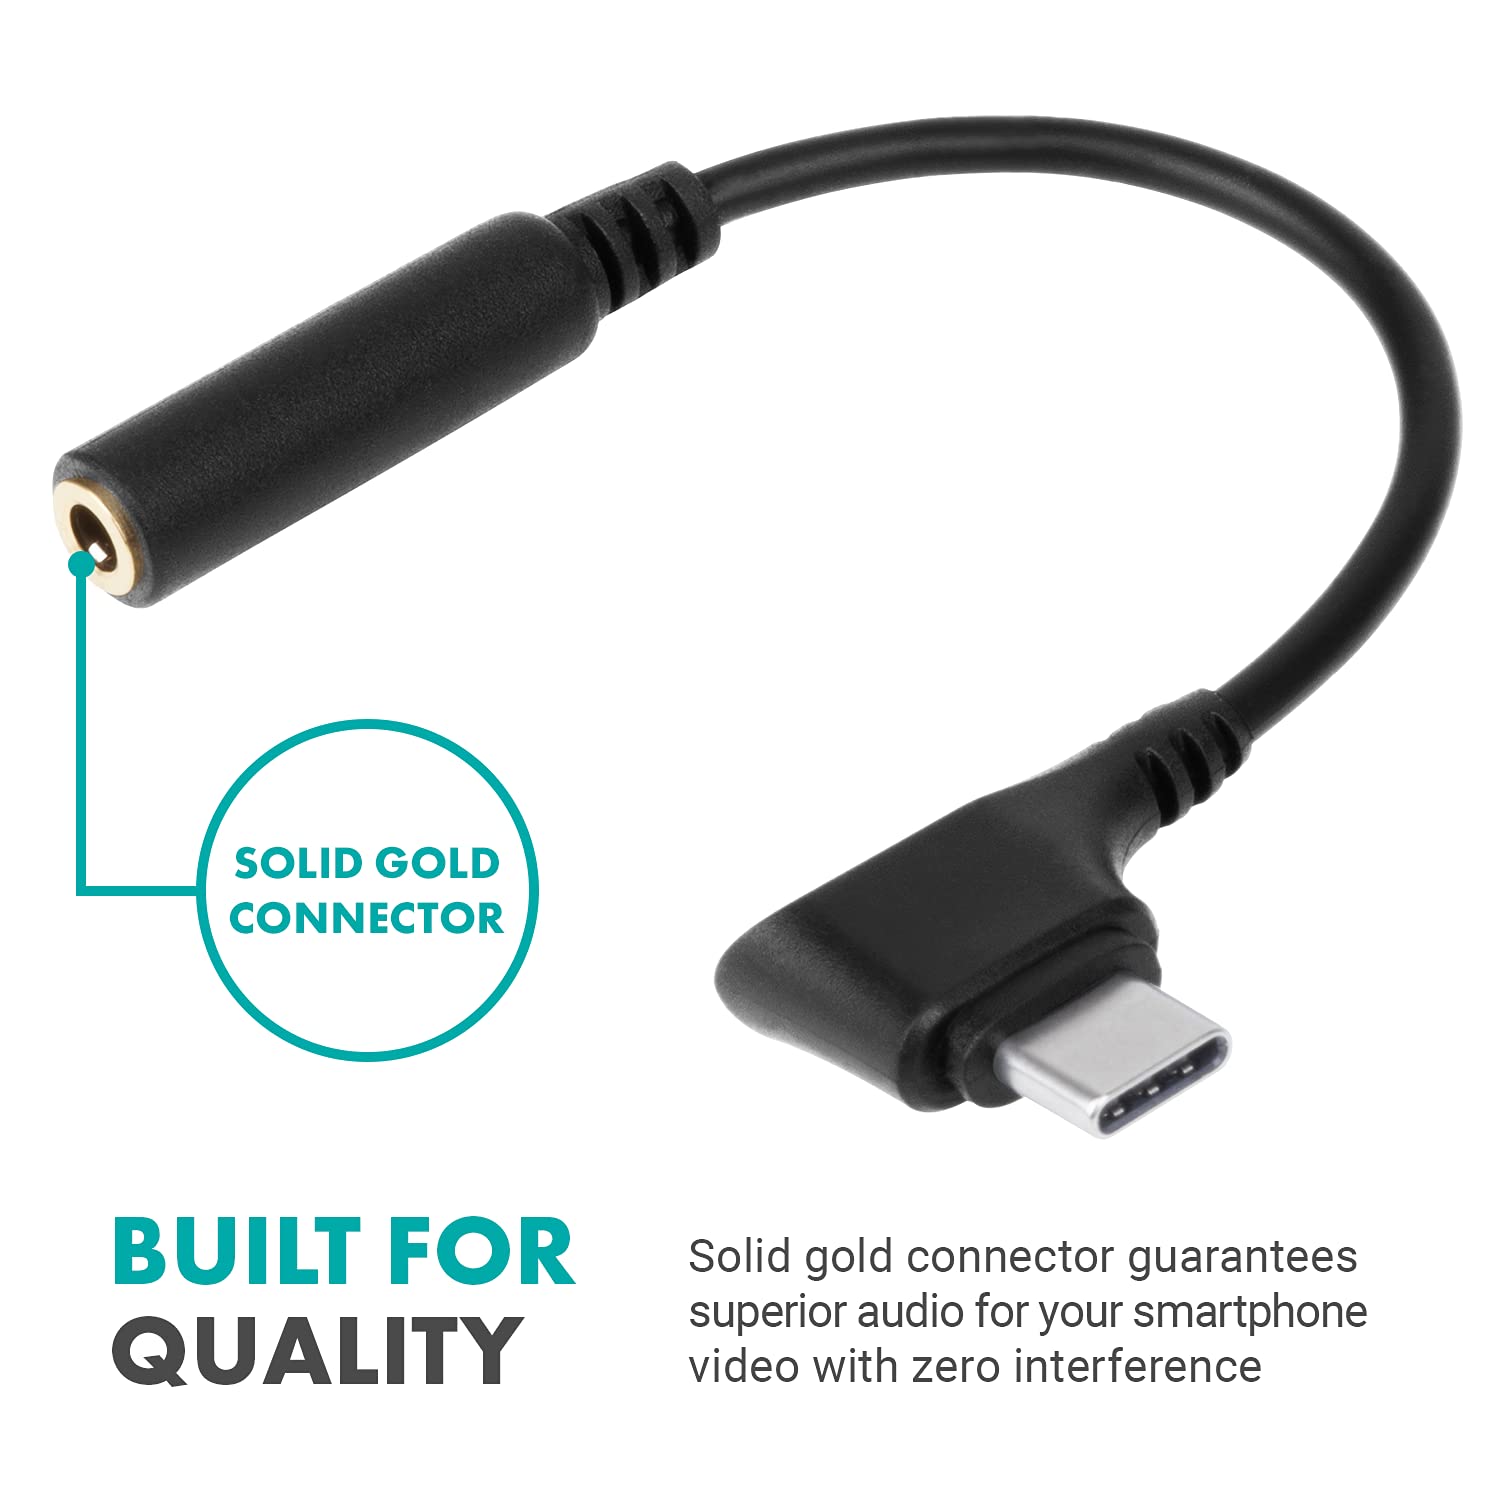 Movo UCMA-3 USB C to 3.5mm Audio Adapter for Microphones - 4-Pole Aux to USB Type C Pixel and Galaxy Smartphones - Female 3.5mm to USB-C Male Right Angle Head - Type-C USB to 3.5mm Jack Audio Adapter  - Like New